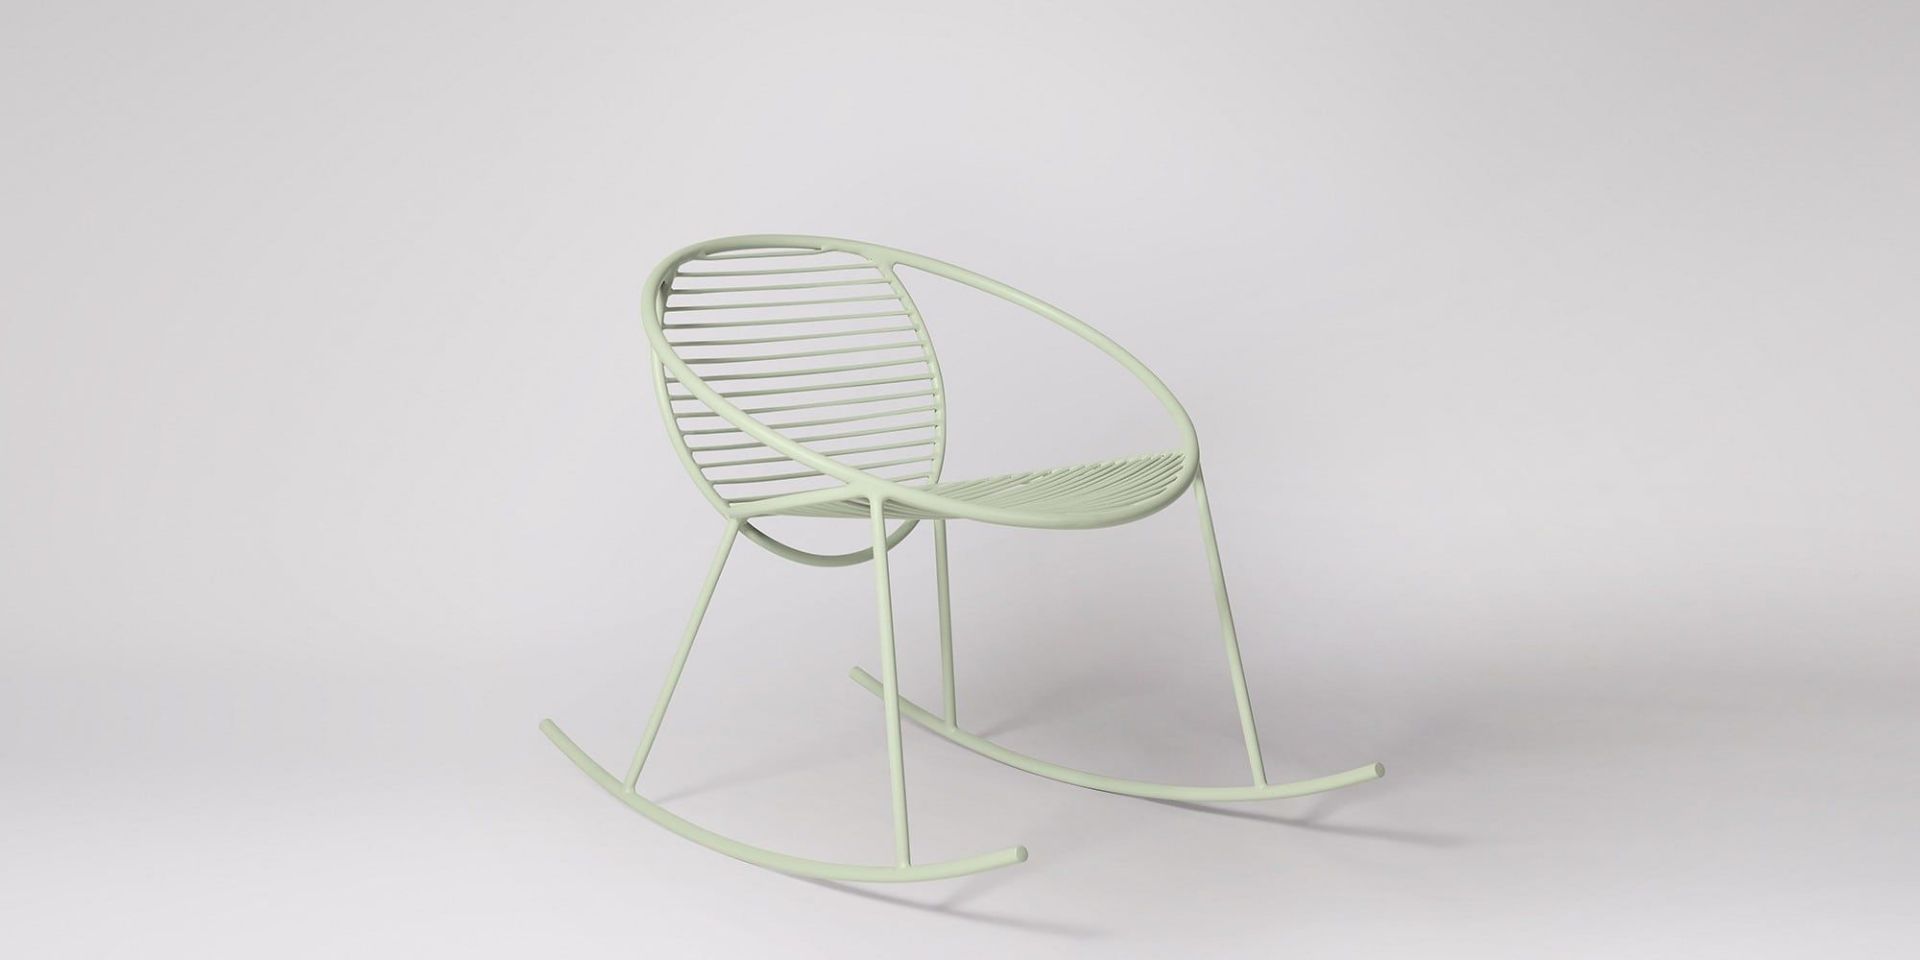 Finsbury Garden Rocking Chair Pastel Green Steel By Swoon Editions (brand new boxed) (brand new